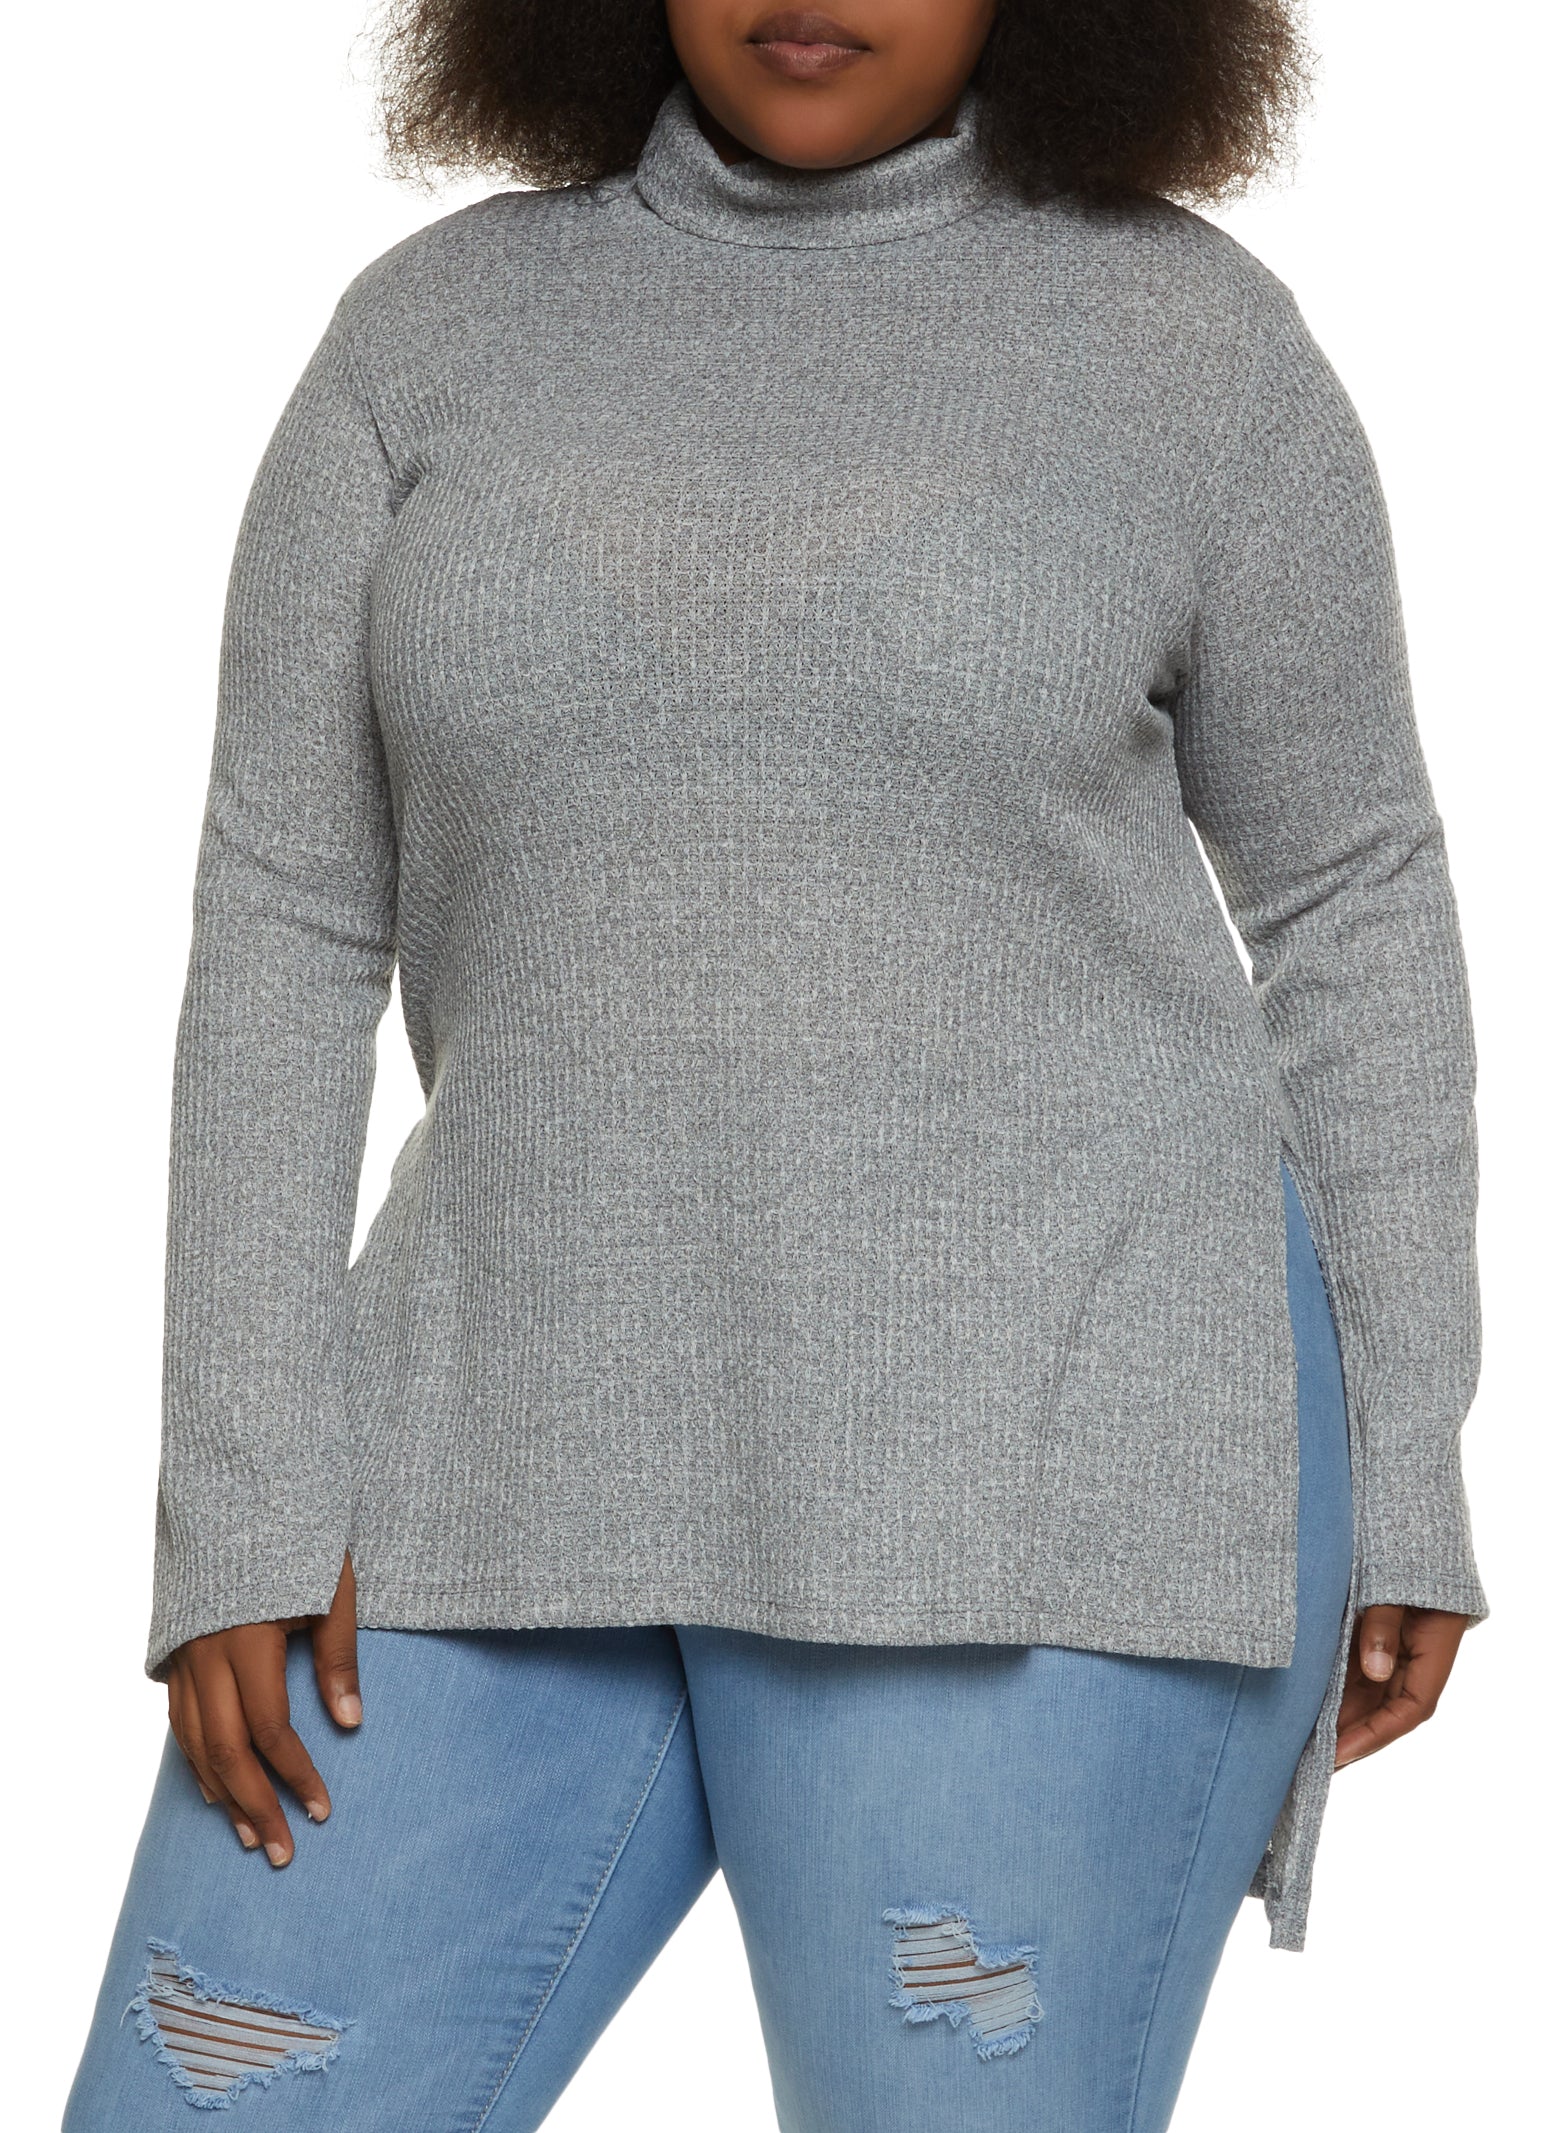 Plus Size Turtleneck High Low Tunic Top